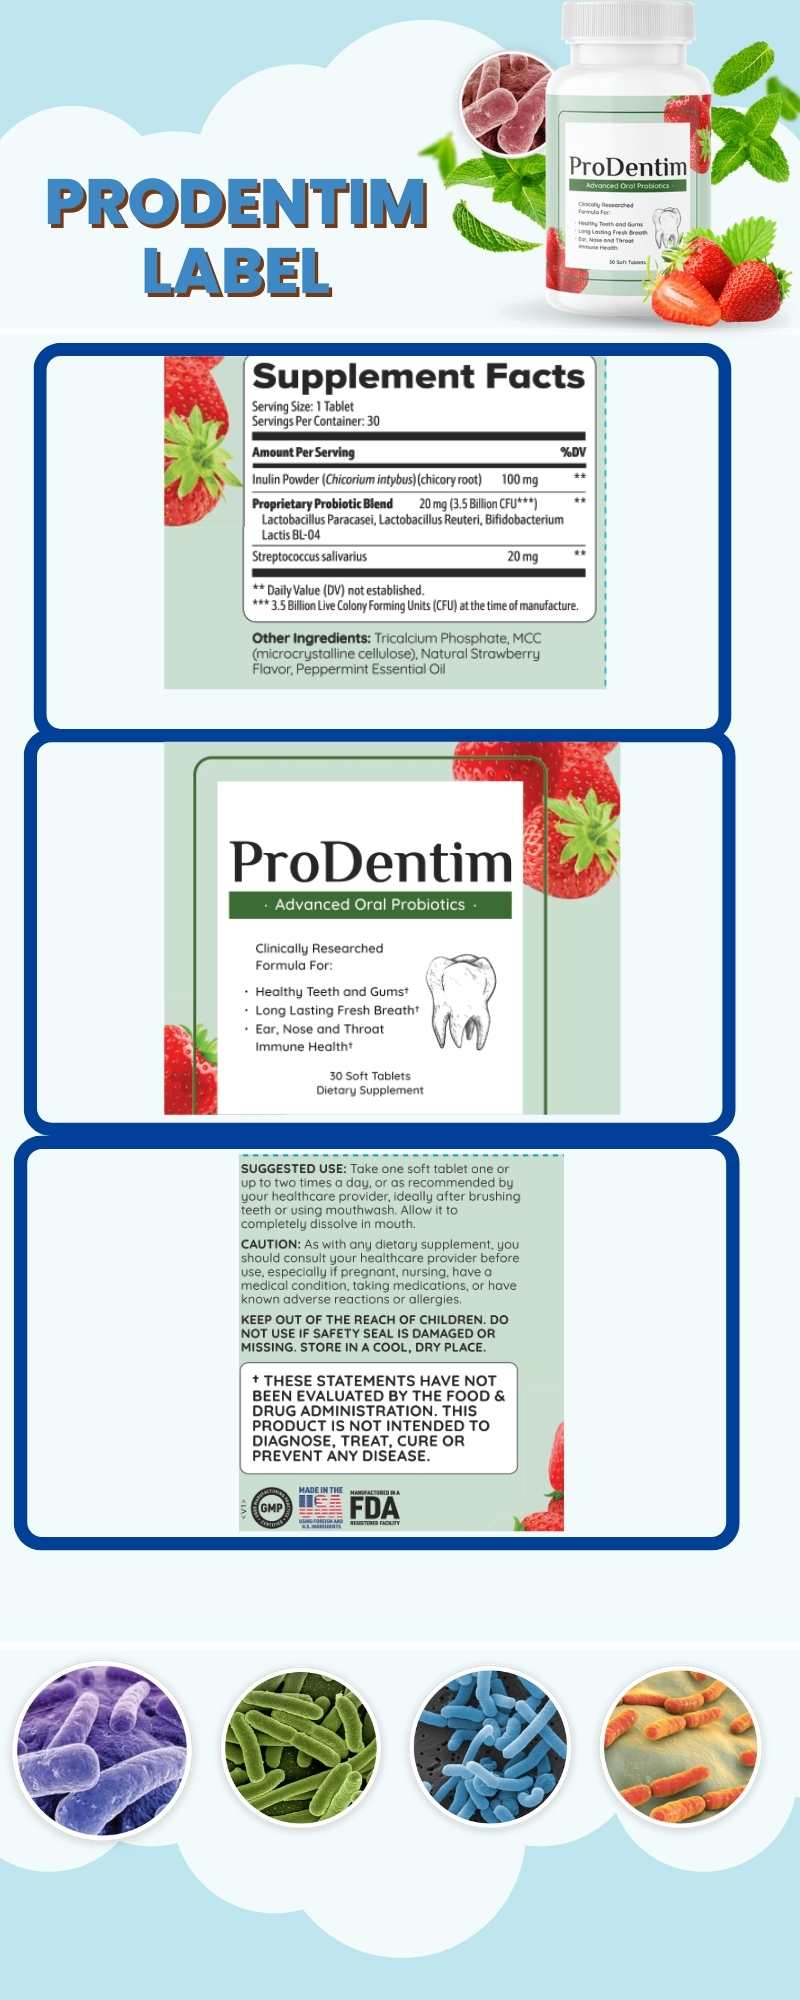 What Are The Ingredients In ProDentim?